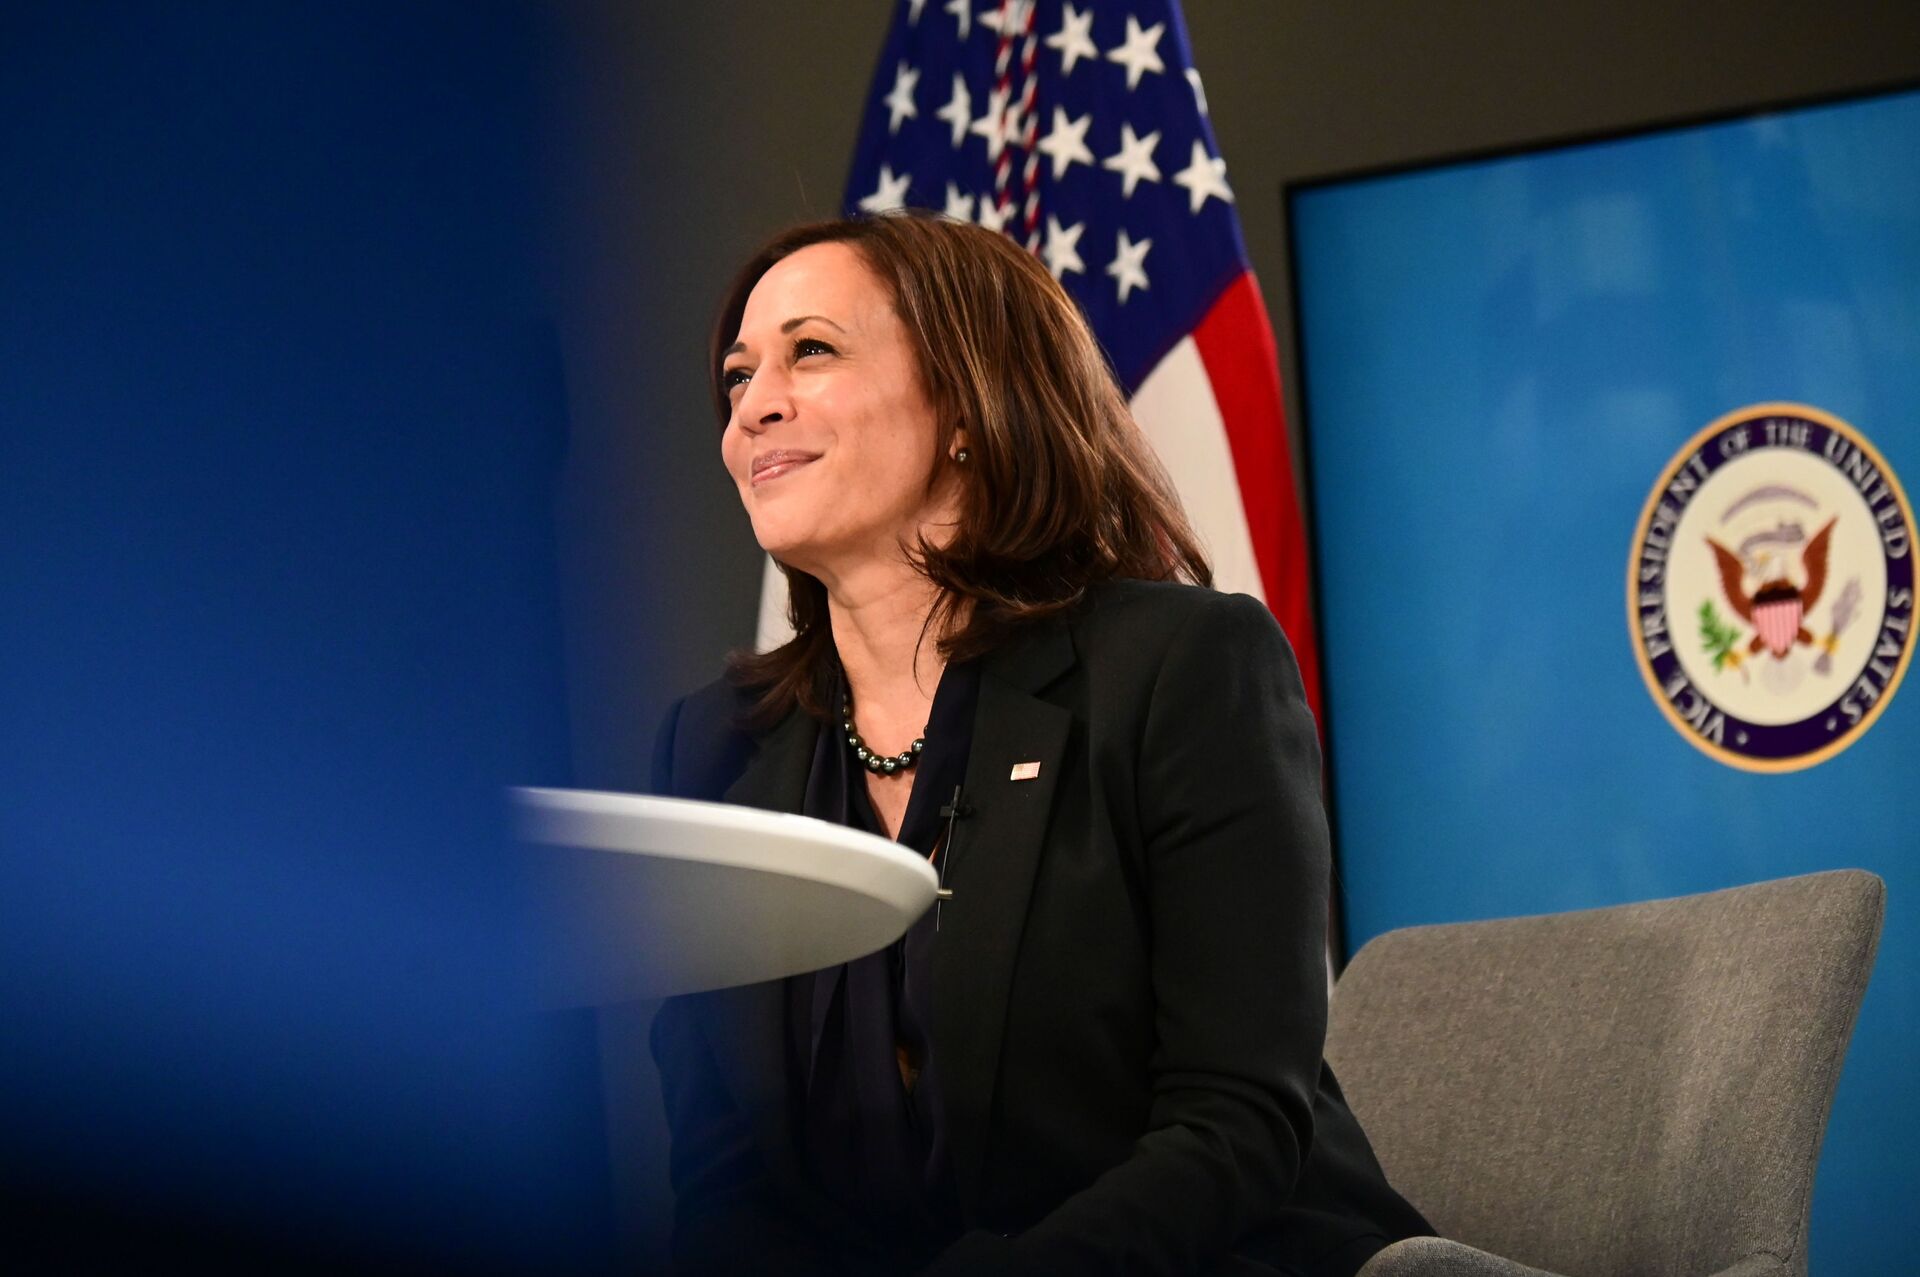 US Vice President Kamala Harris participates in a virtual meeting to discuss the newly-signed American Rescue Plan, COVID-19 relief legislation, at the White House in Washington, US, March 11, 2021 - Sputnik International, 1920, 07.09.2021